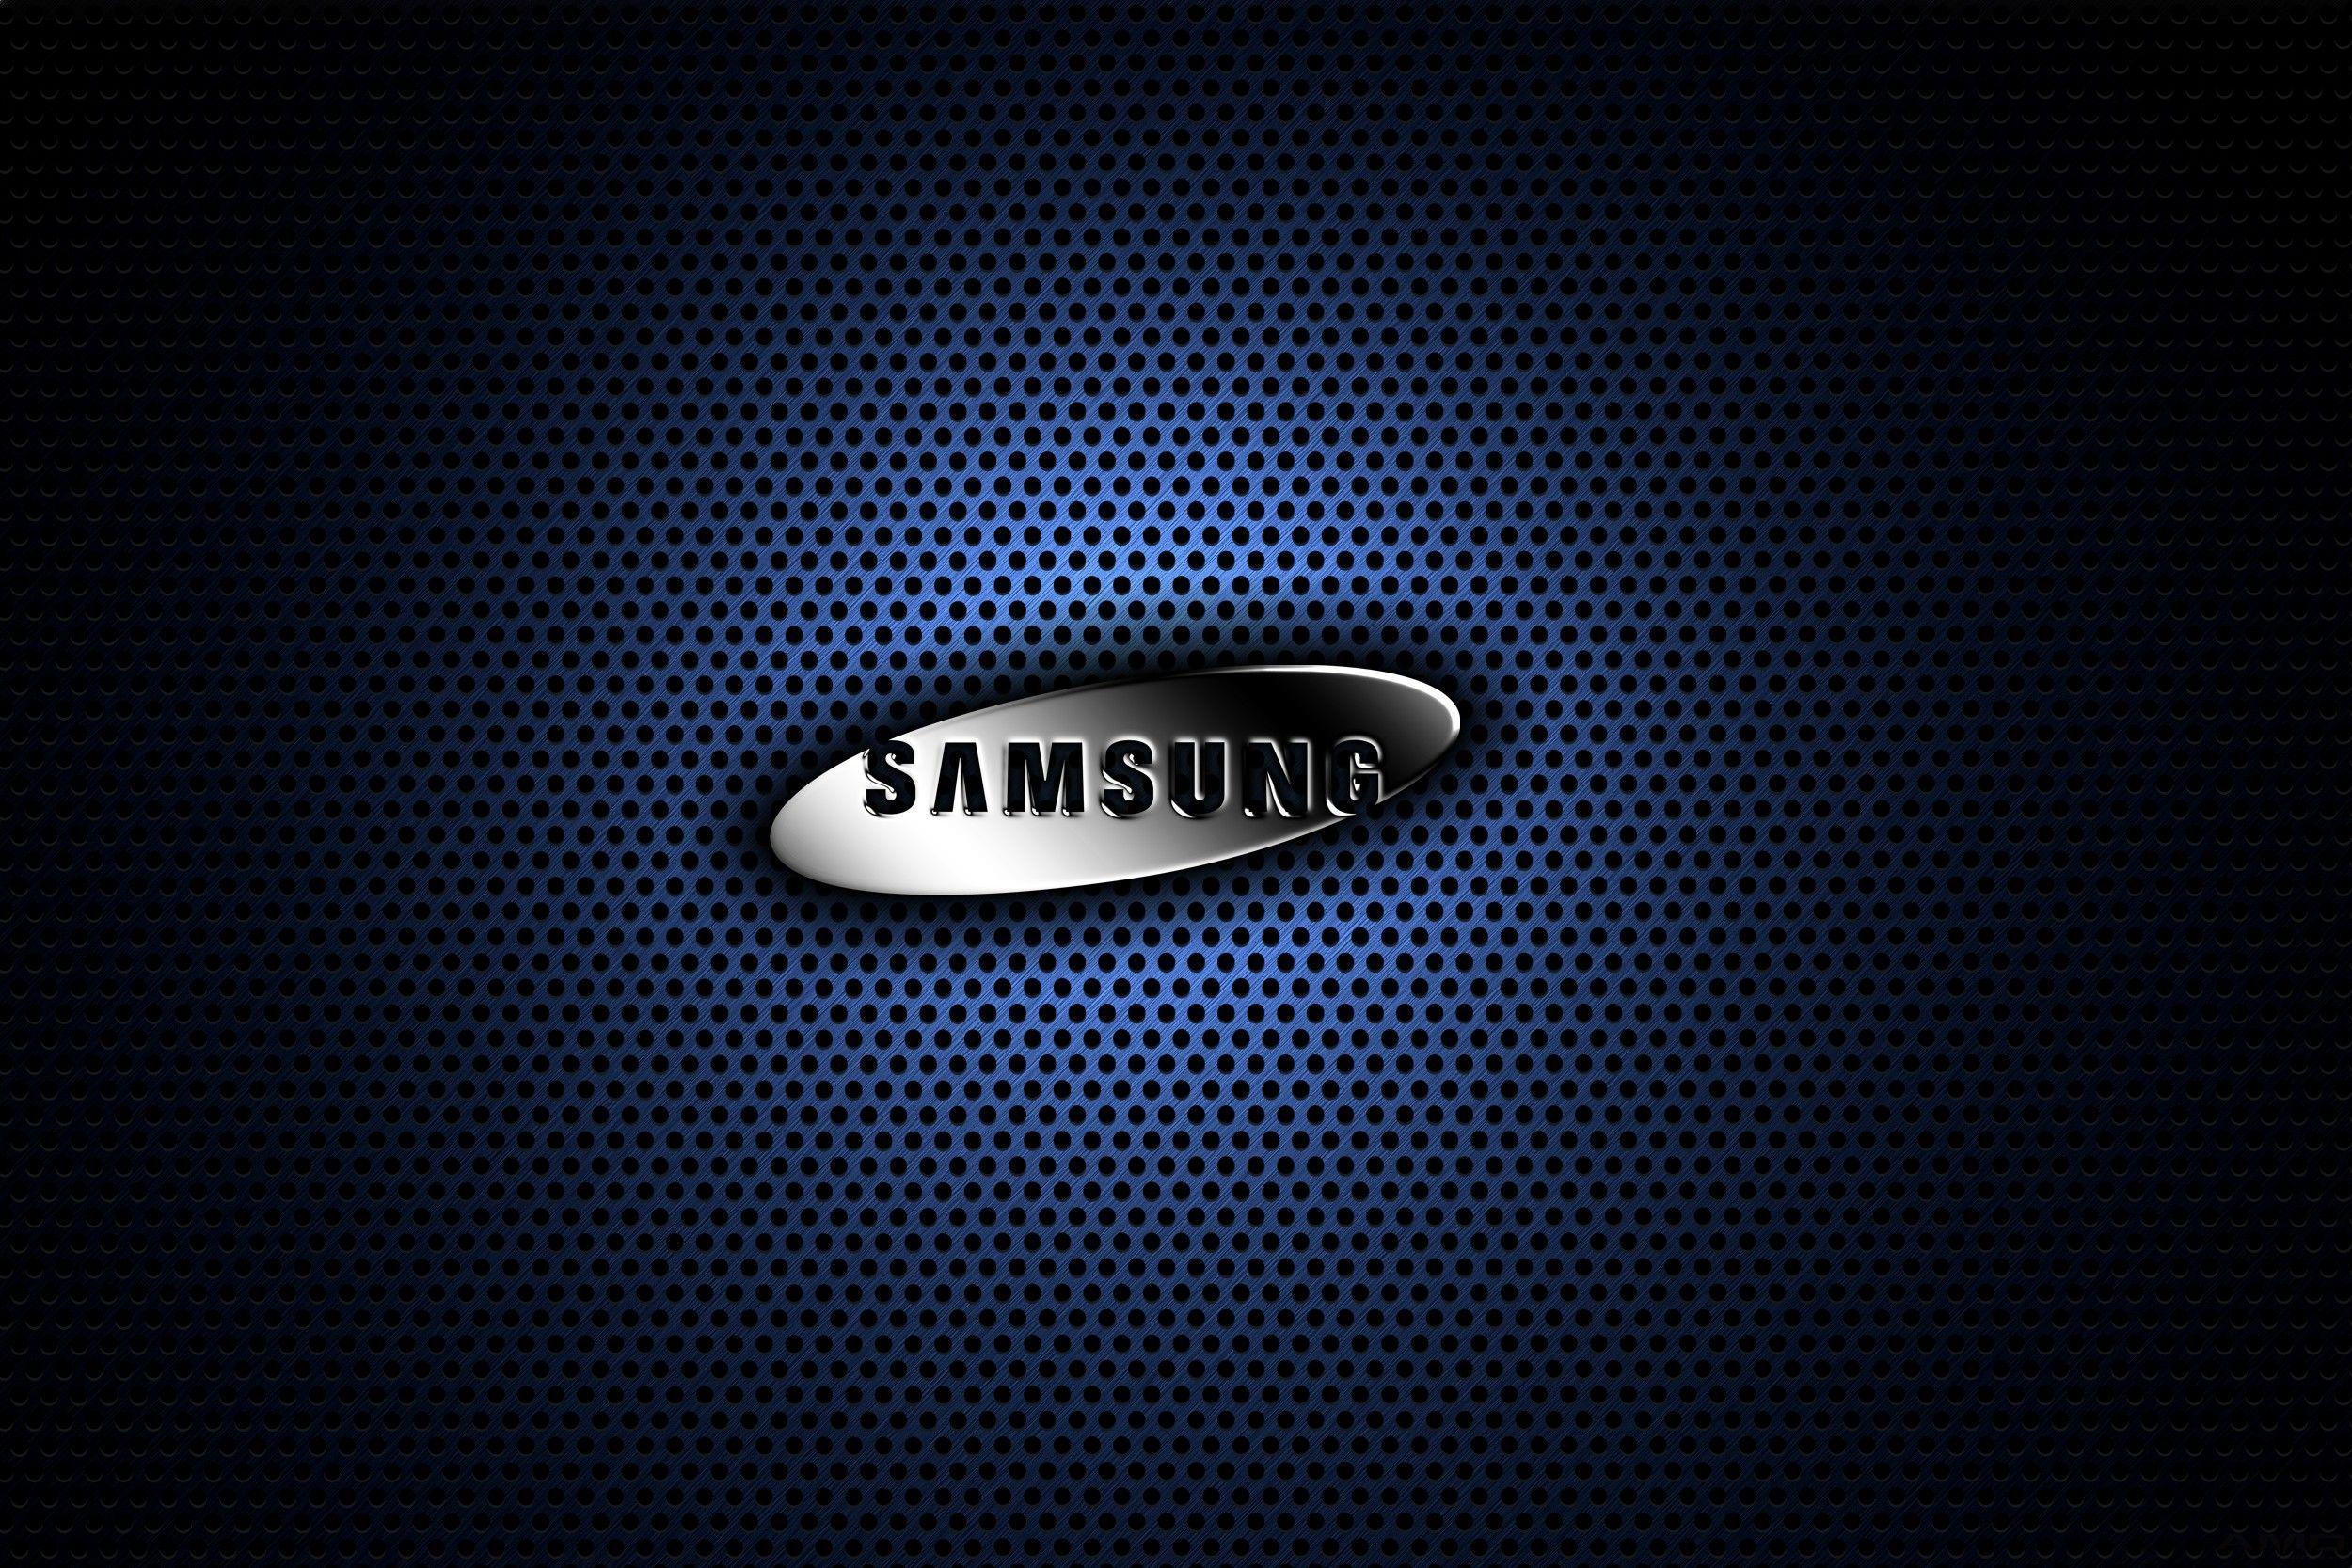 Cool Samsung Logo - Samsung Logo Image HD Wallpaper Background For PC Computer. Things